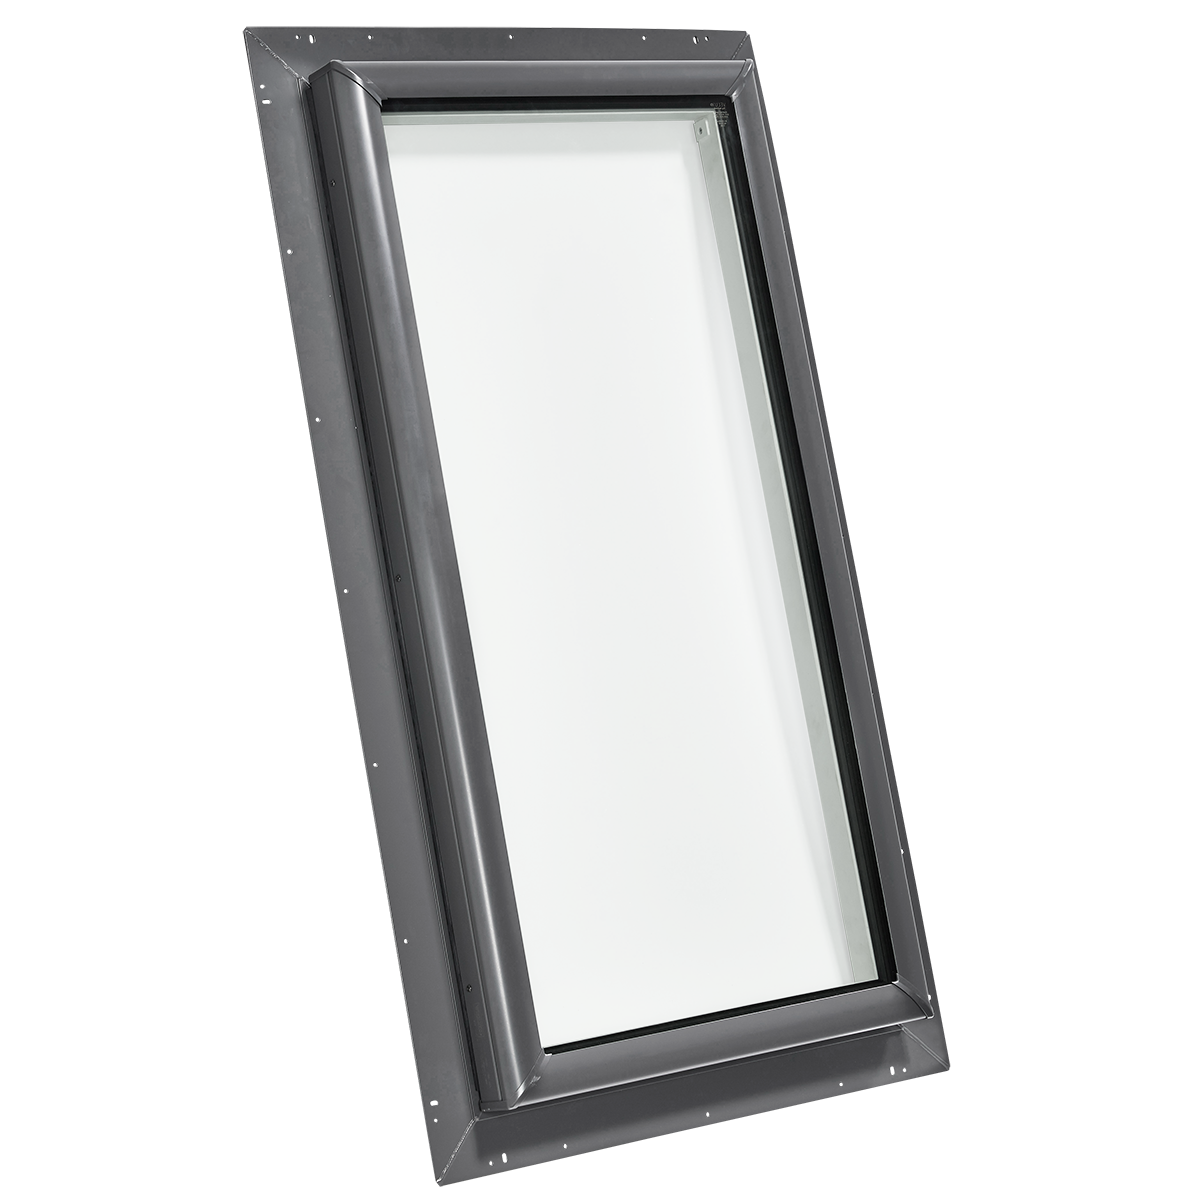 Fixed Self-Flashed Skylight with Laminated Low-E3 Glass - 22-1/2 in. x 30-1/2 in. - QPF 2230